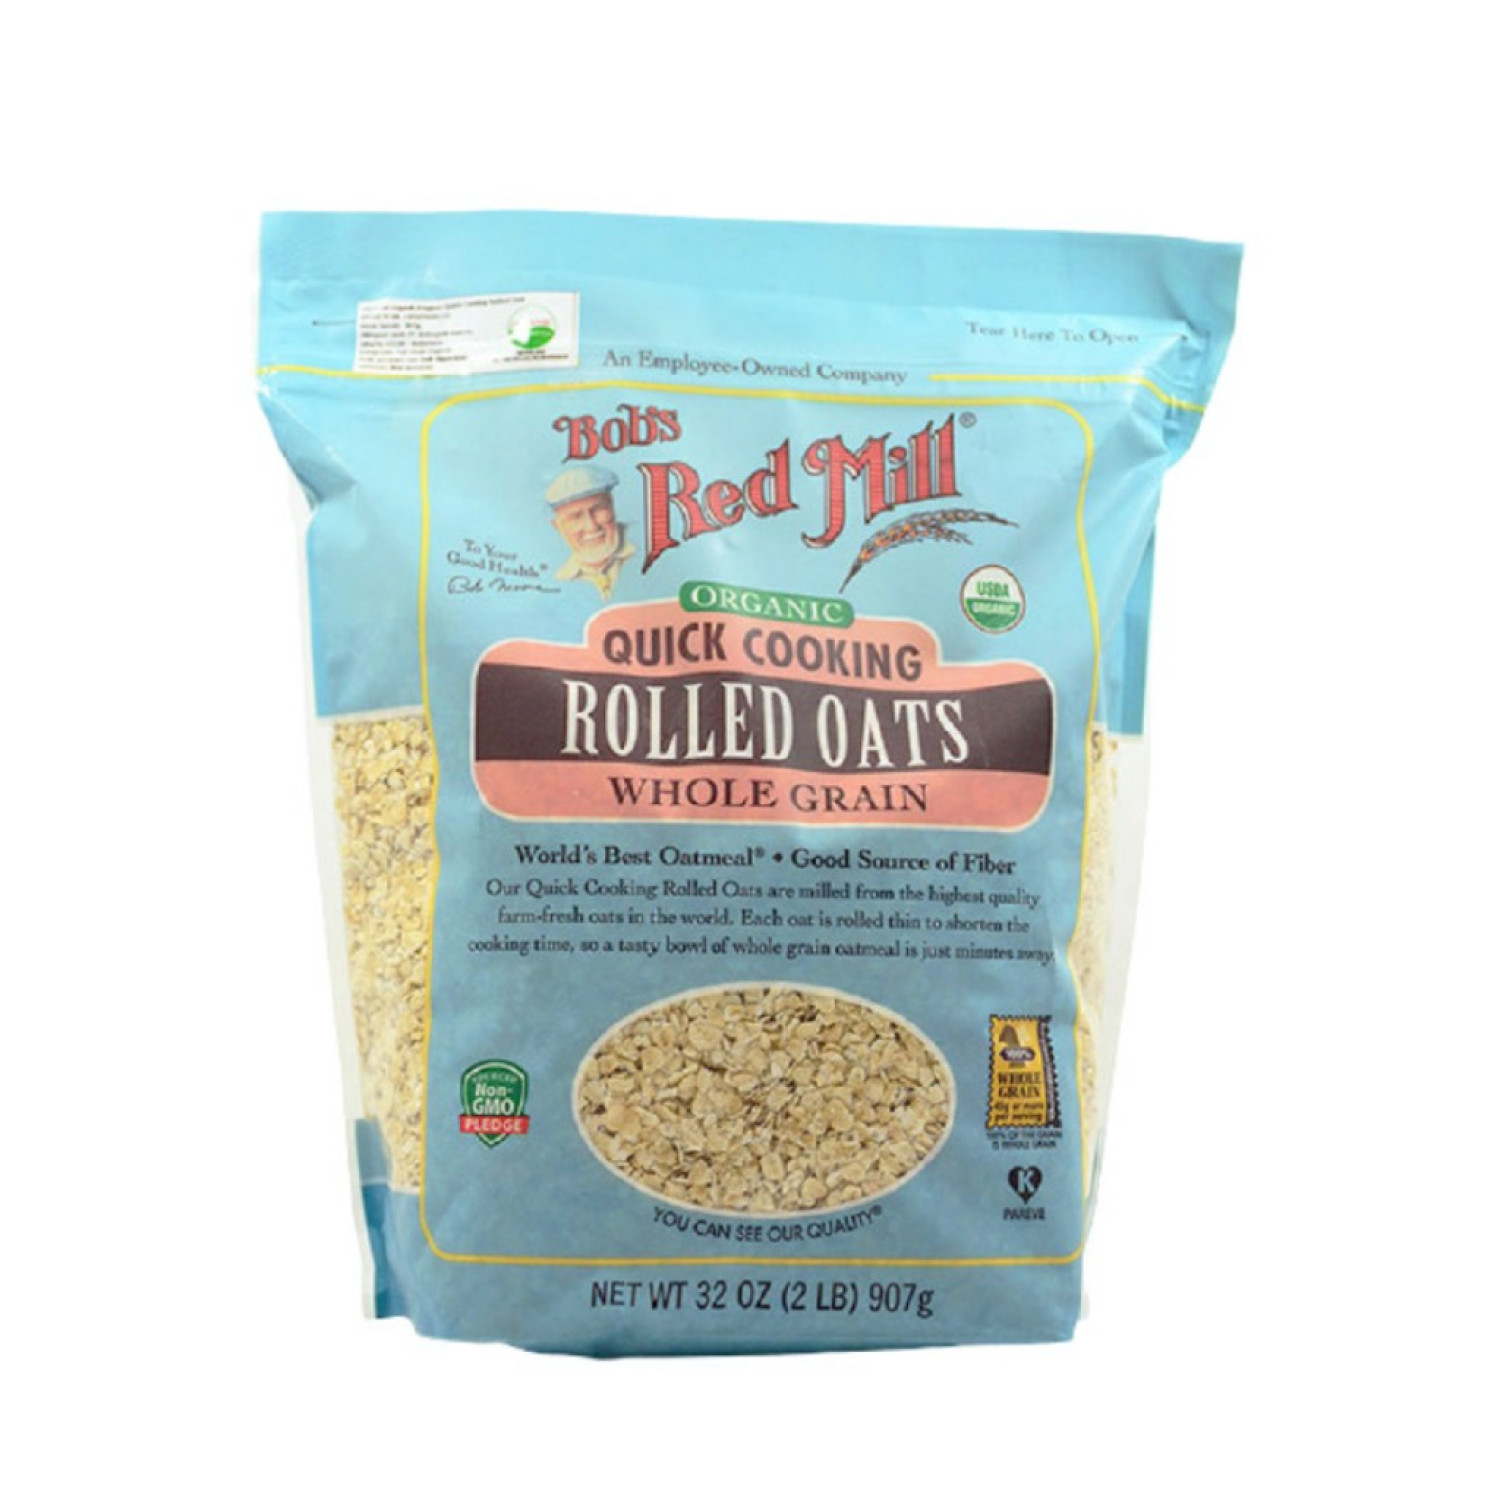 Bob's Red Mill Bob's Red Mill Organic Cooking Rooled Oats